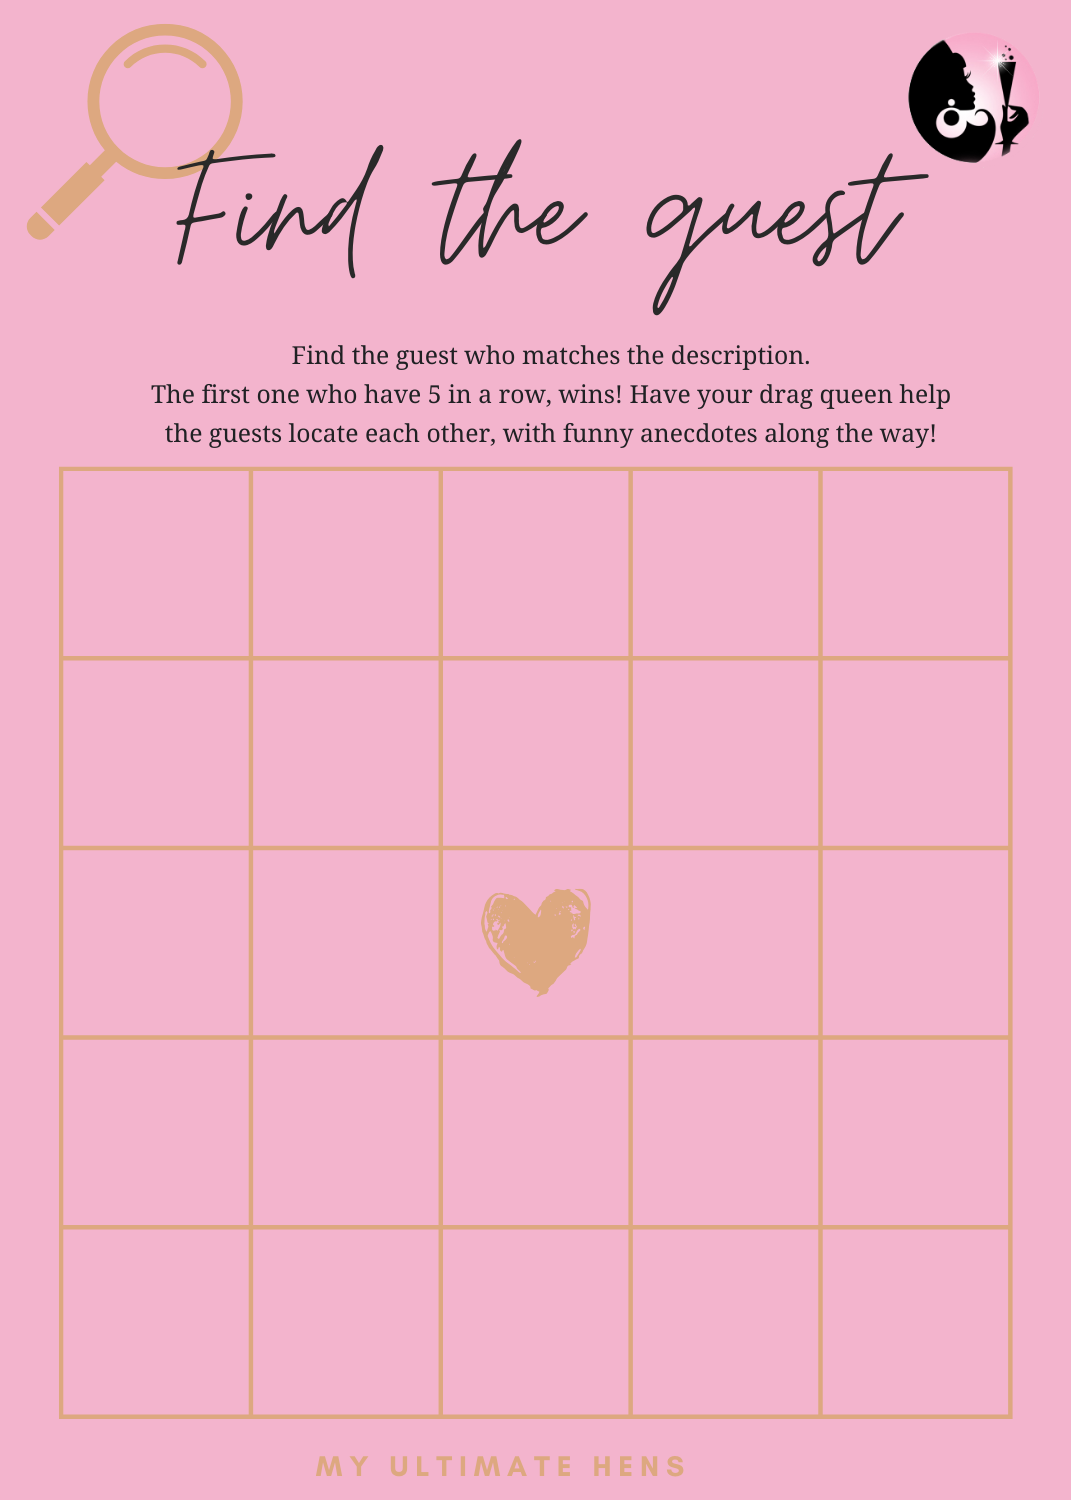 Blank Template For Find The Guest Hens Party Game Where The Bride Can Download And Print To Play At The Hens WIth The Drag Queen